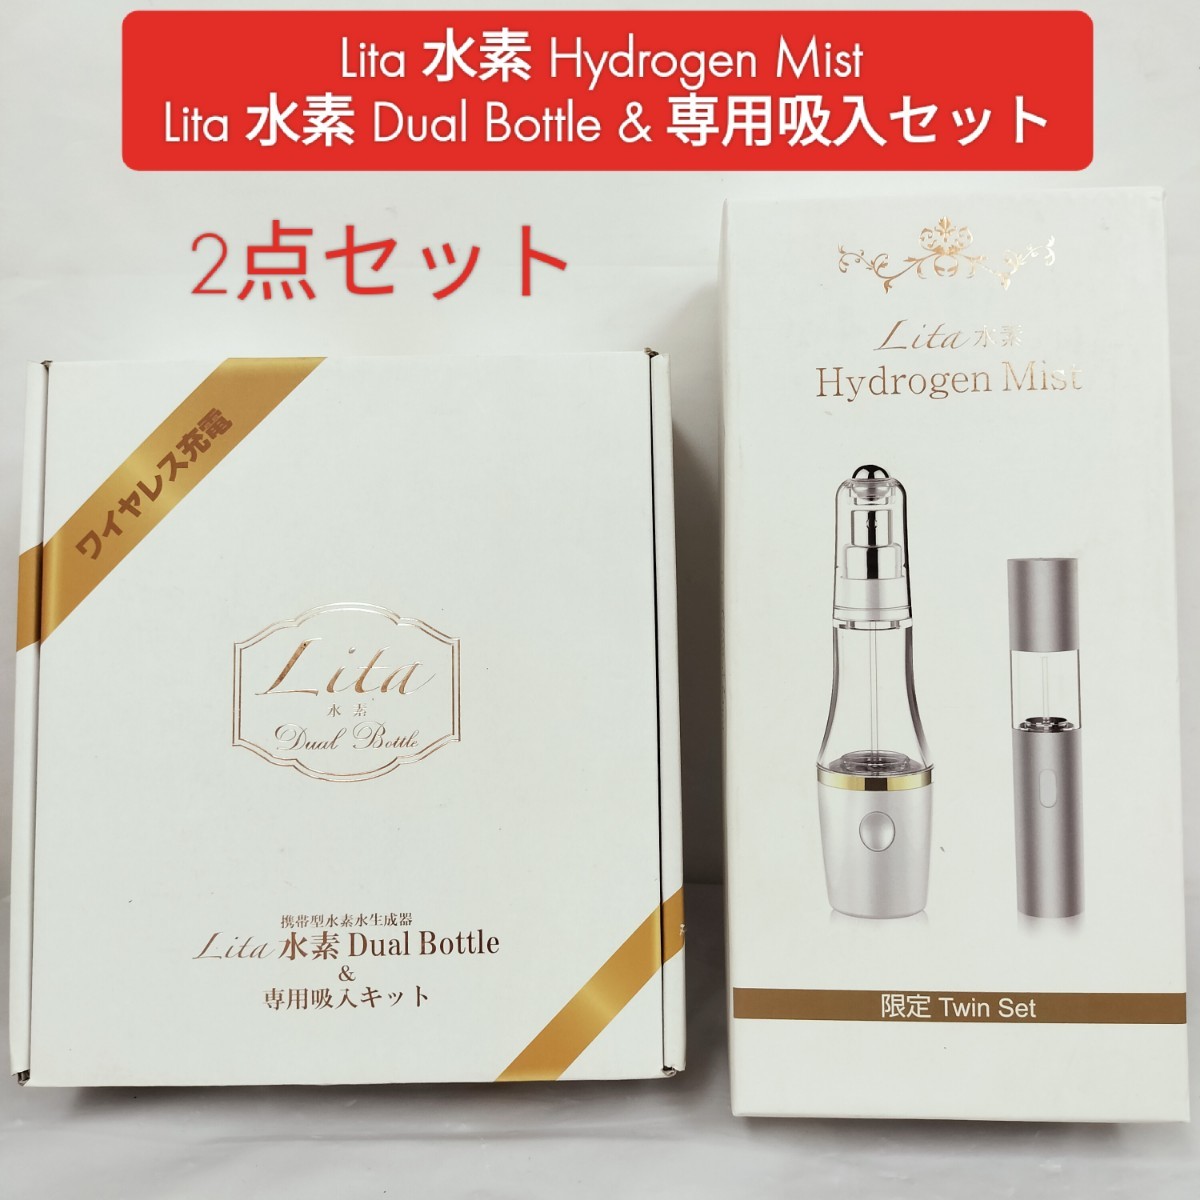 [ water element beauty ] unused contains Lita water element Hydrogen Mist &mini limitation twin set / water element Dual Bottle & exclusive use . go in set / beauty health /ka new re attaching 